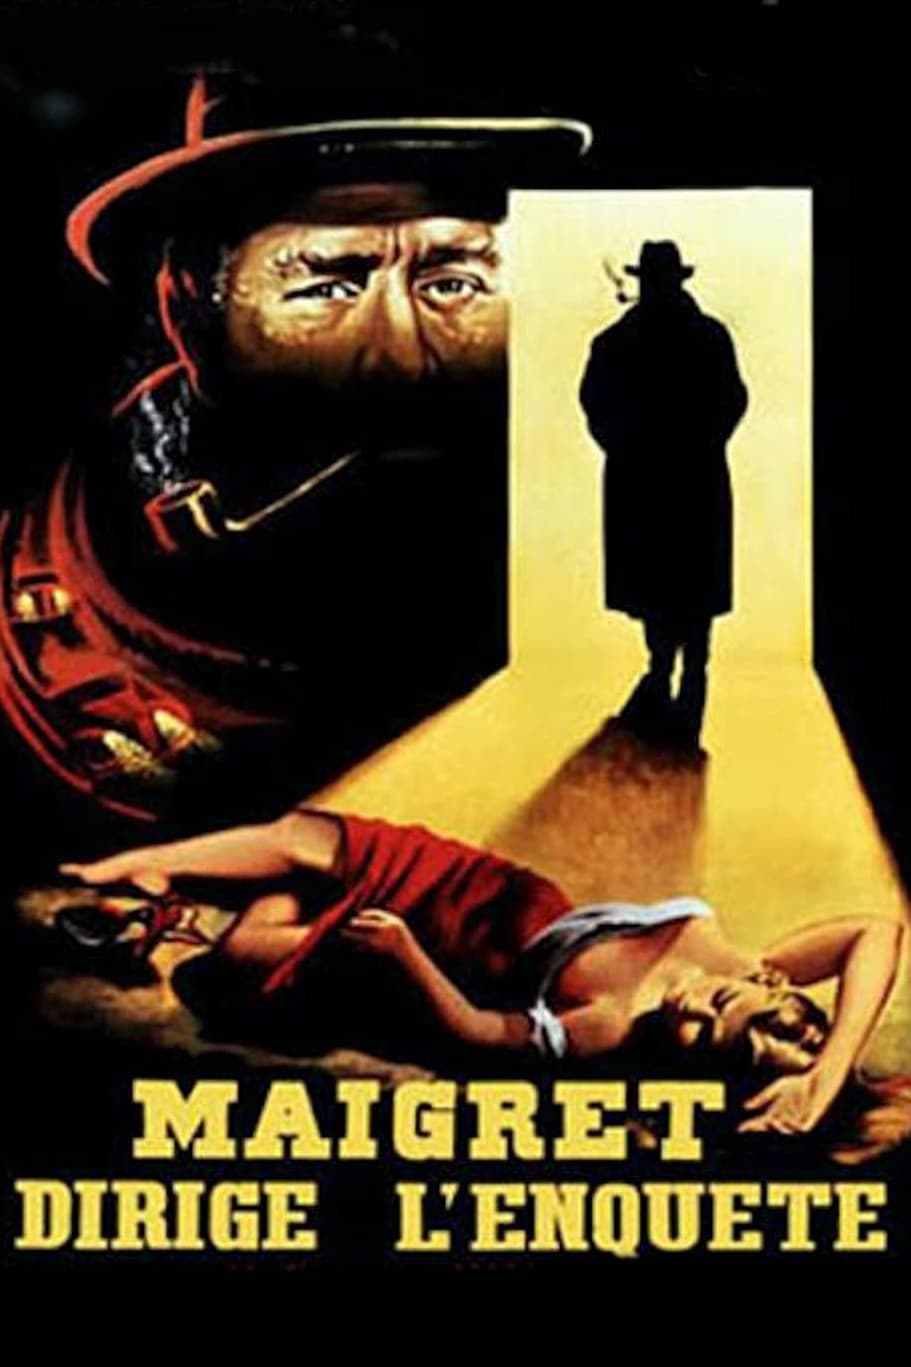 Maigret Leads the Investigation